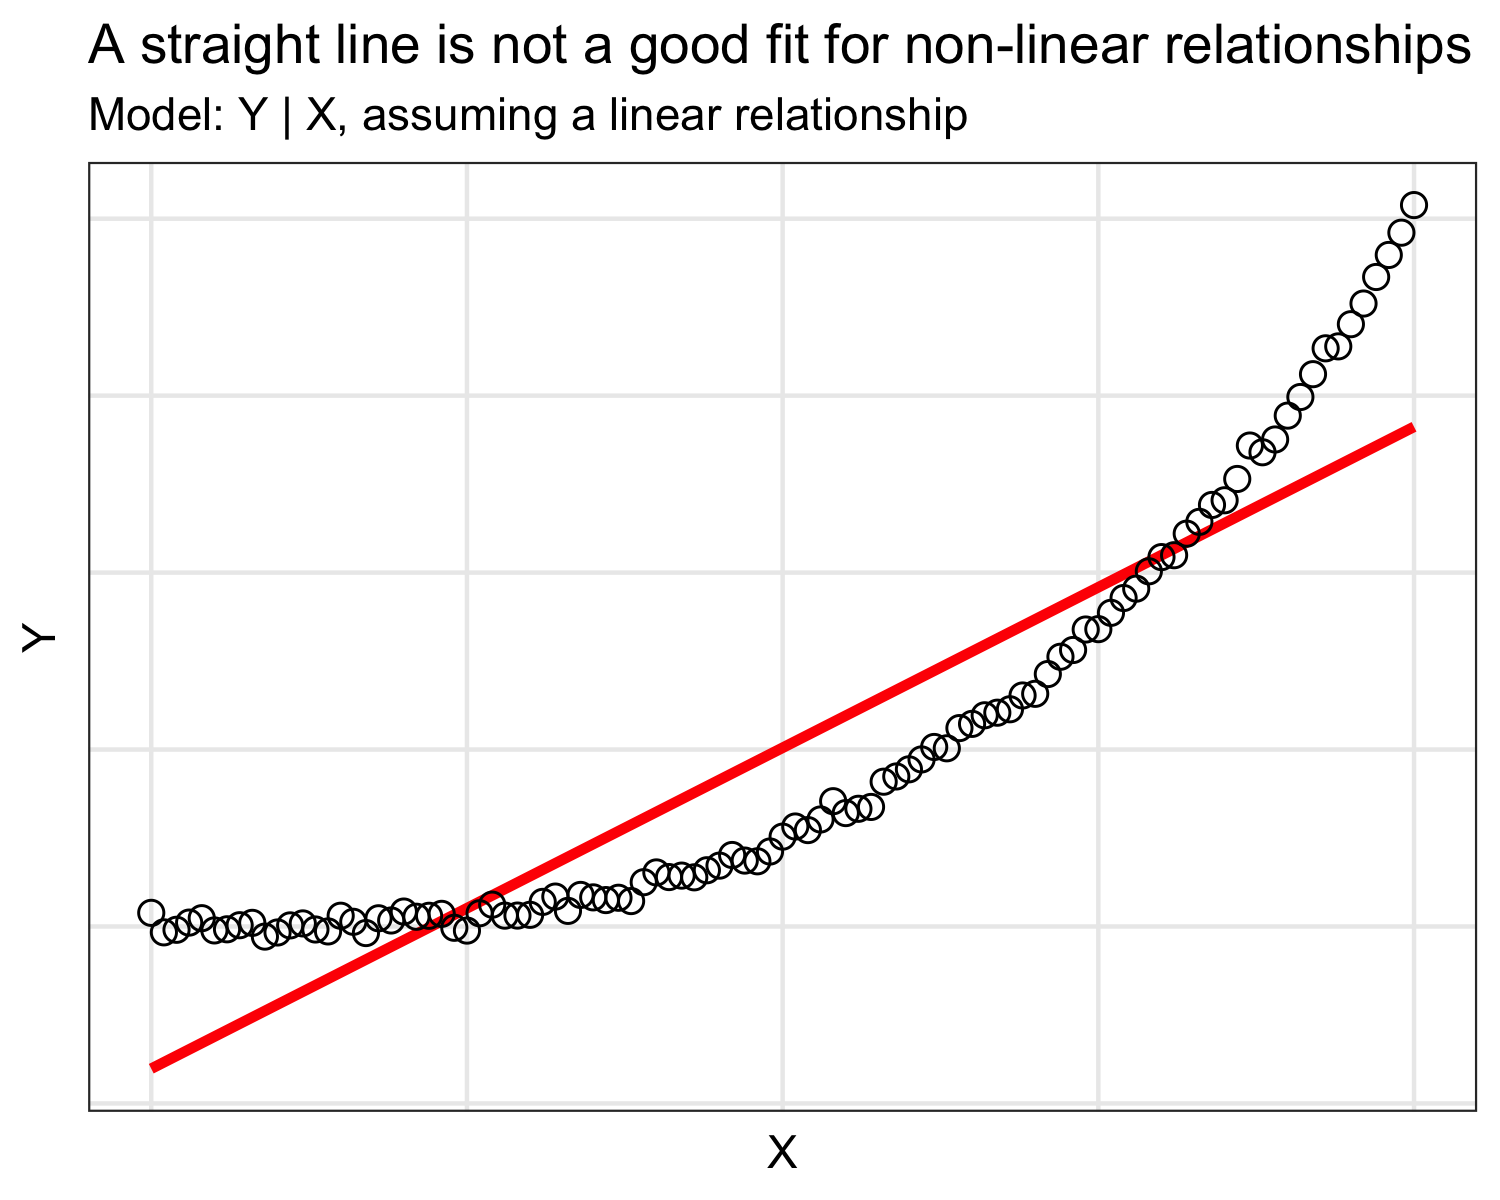 Figure 1: Example scenario in which a straight line as regression curve would not fit well a non-linear relationship